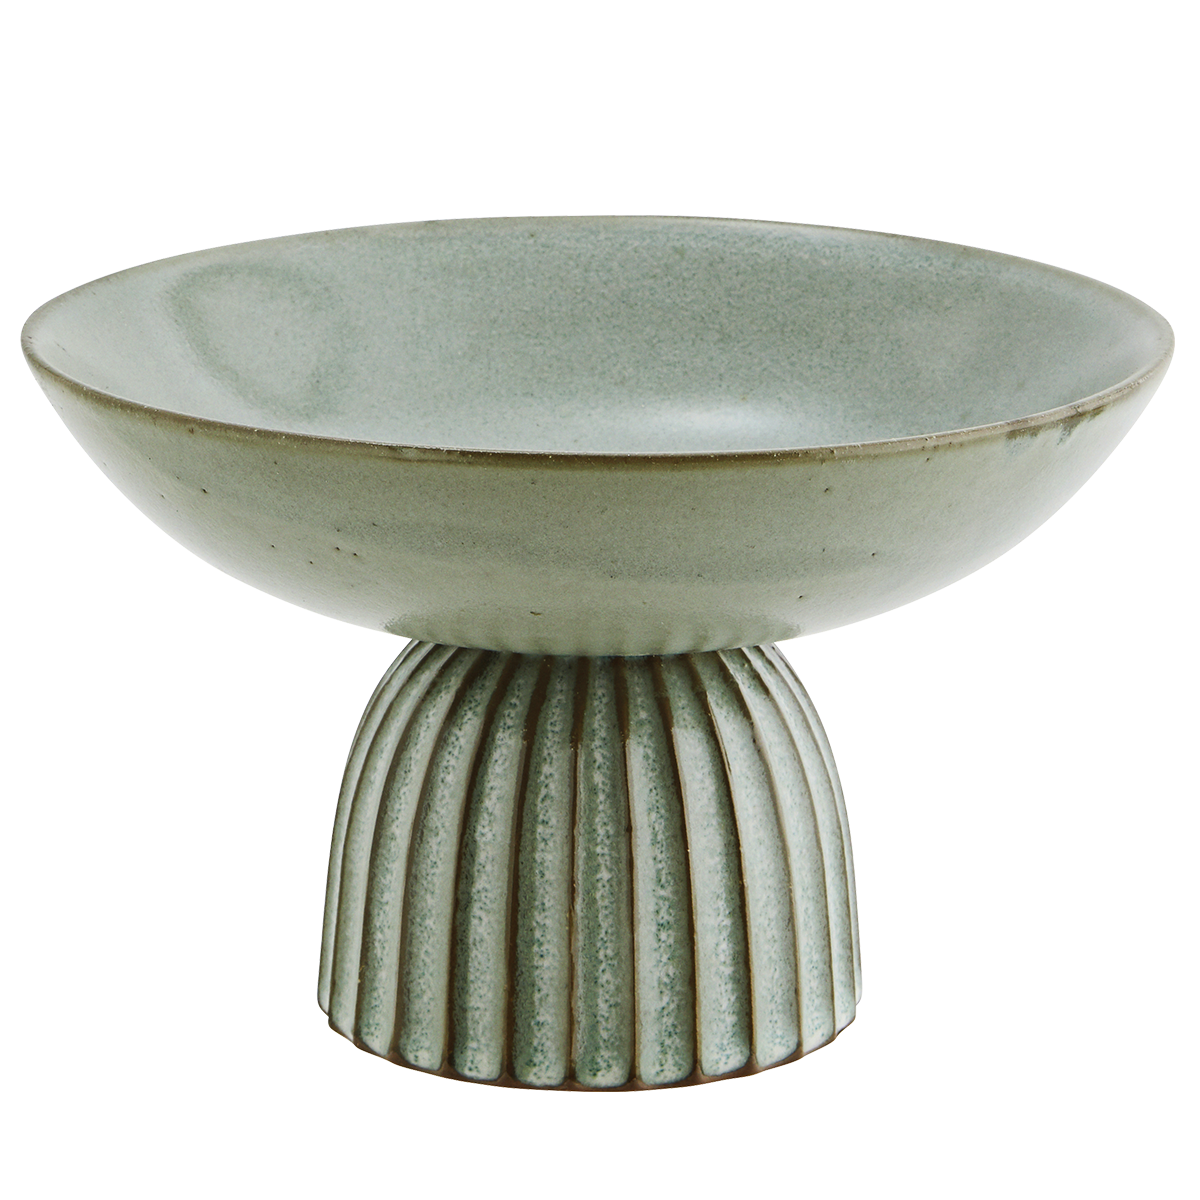 Stoneware bowl on stand